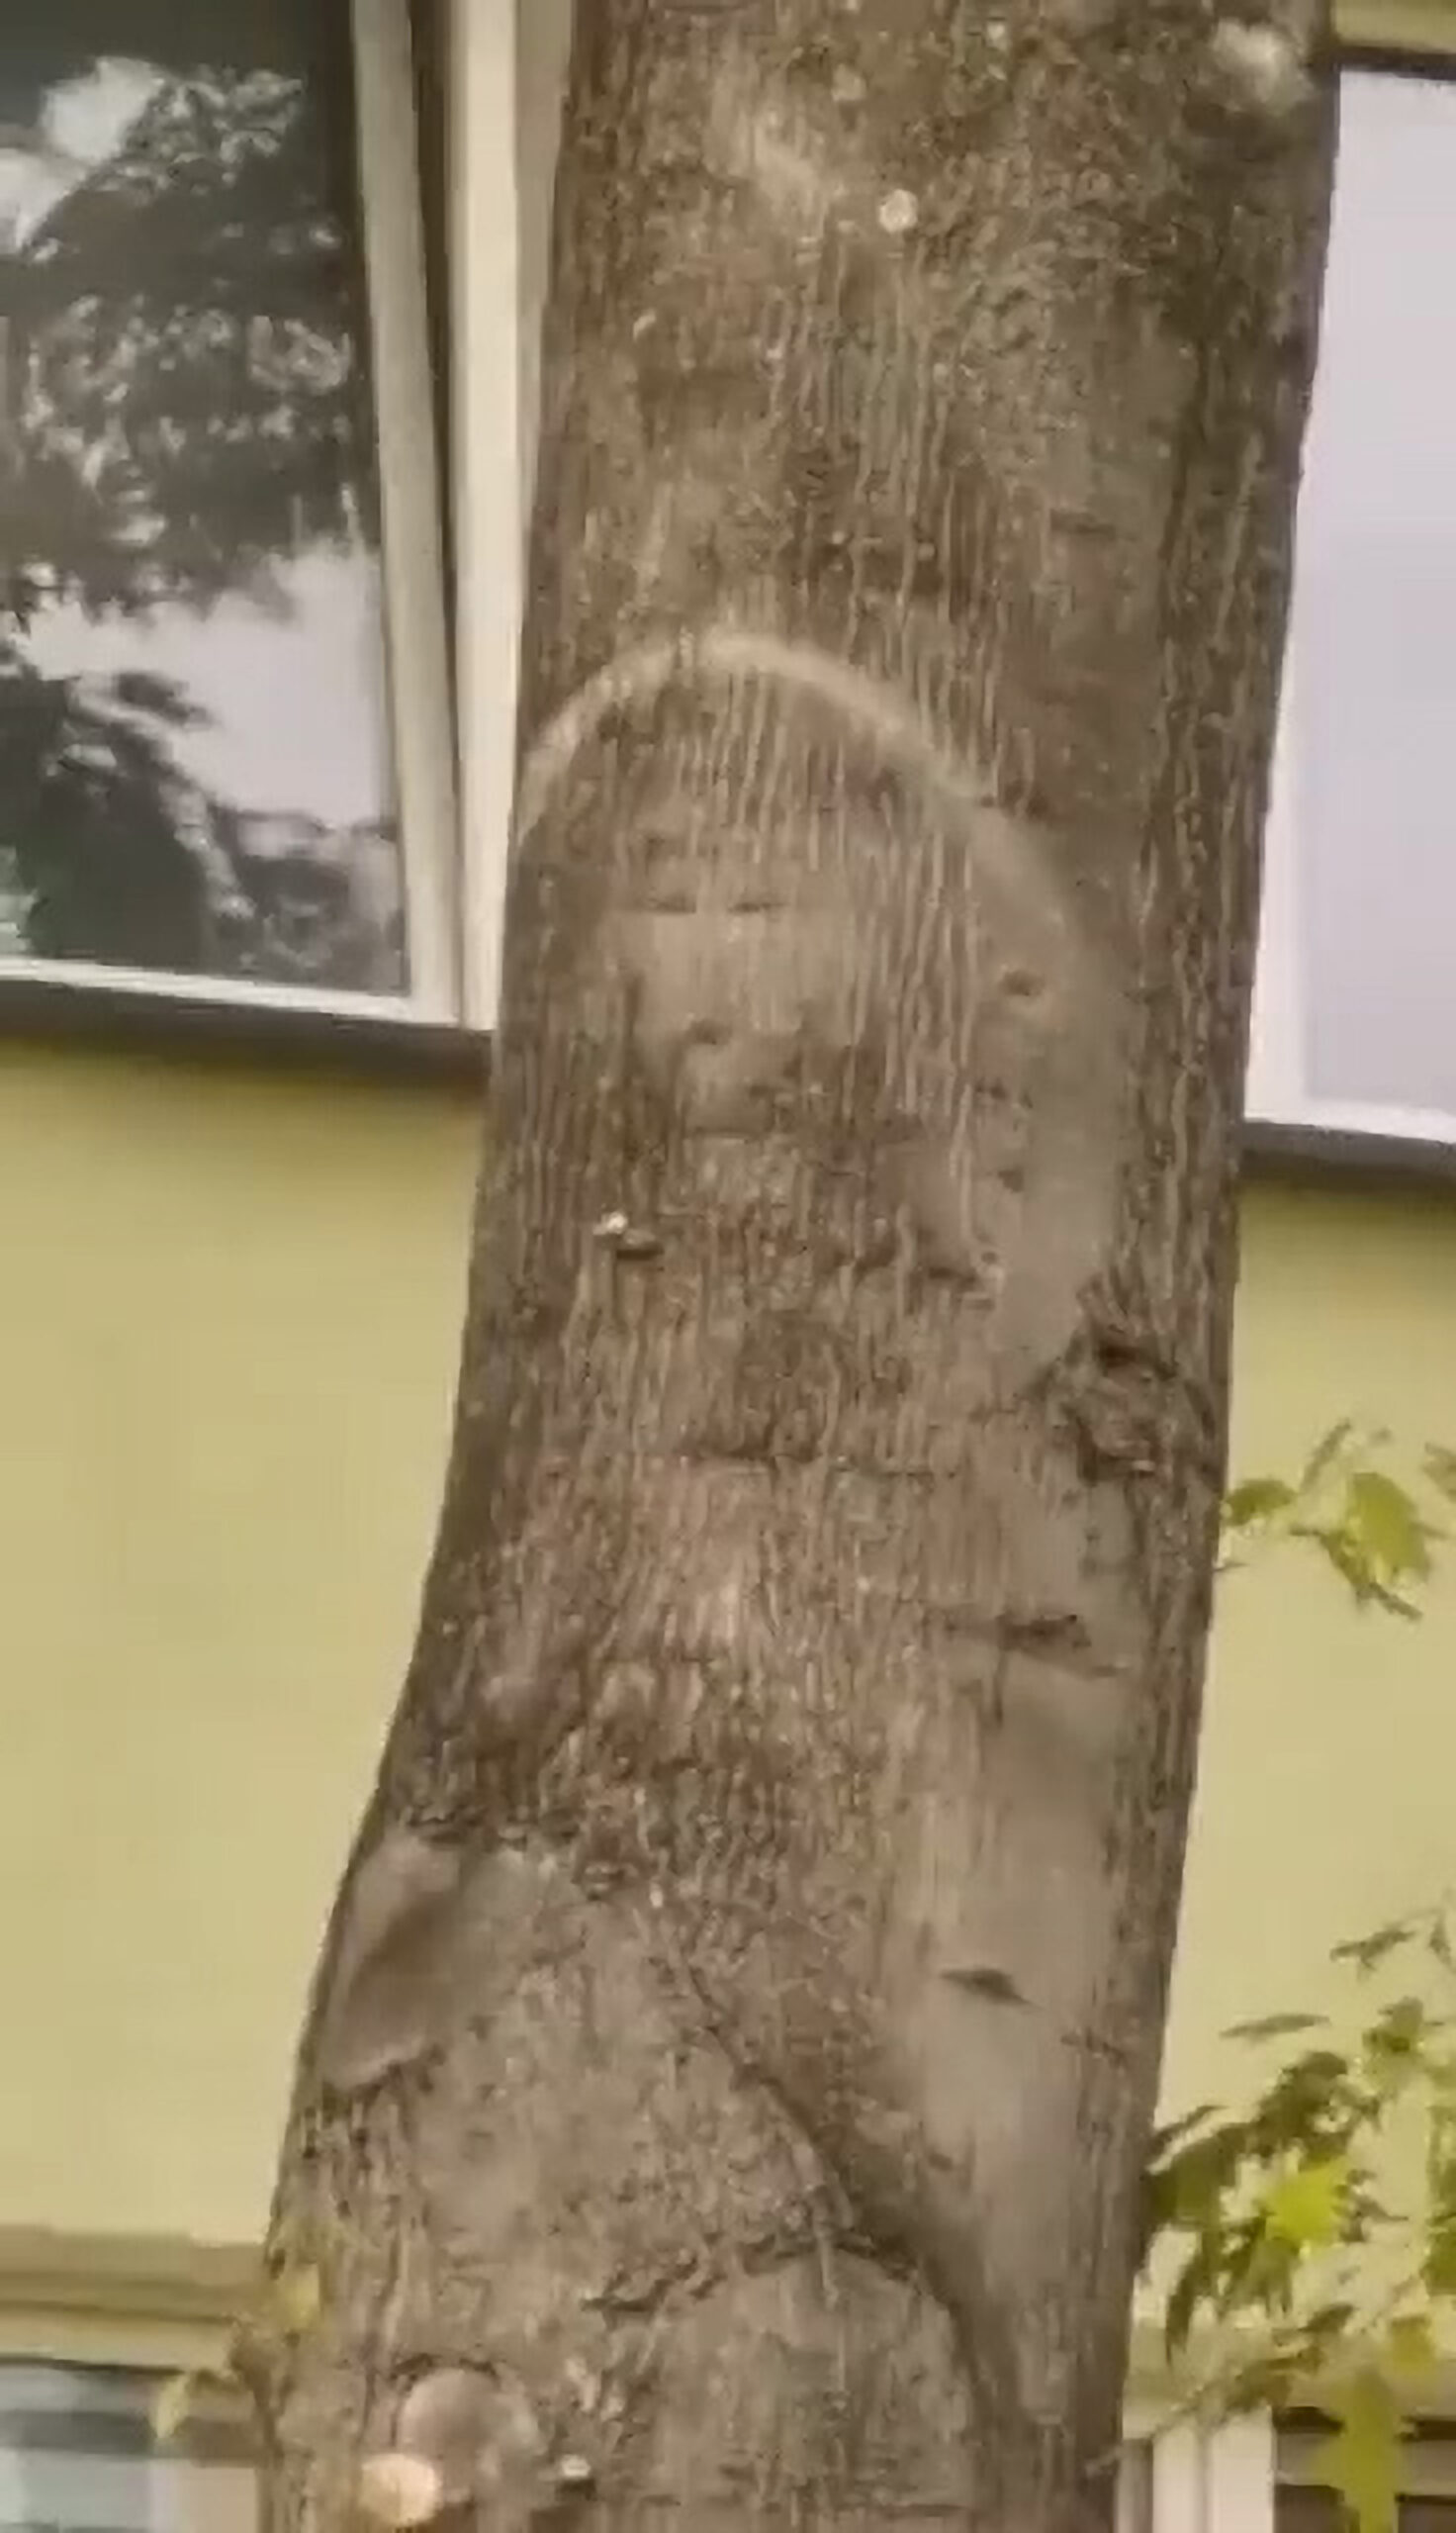 Read more about the article  Faithful Flock To Tree In Polish Town After Image Of Christ Appears In Bark